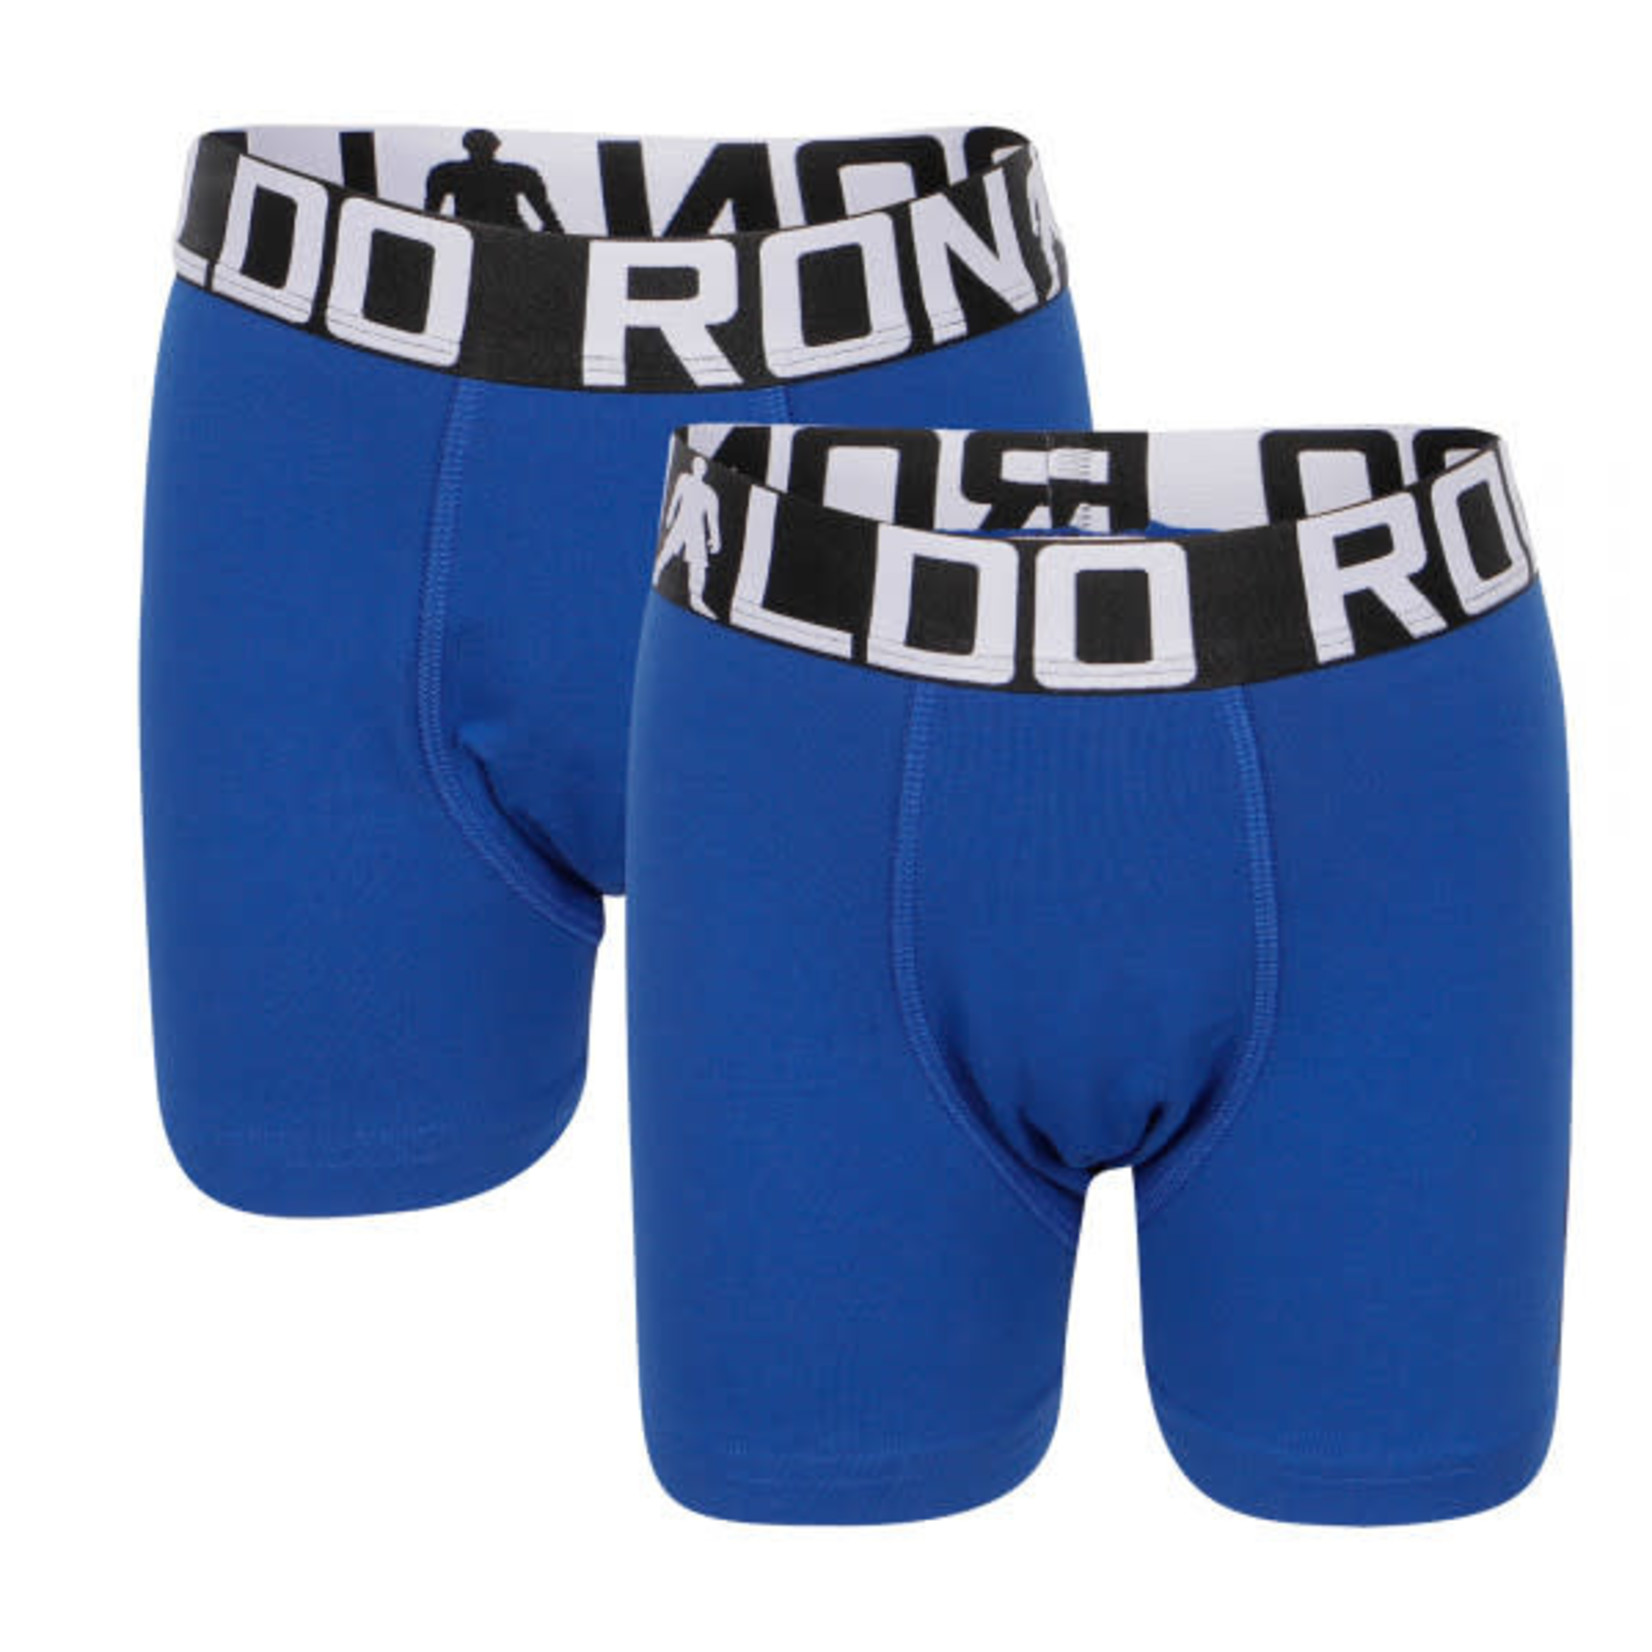 CR7 Boxer Underwear Fashion 2-Pack - Blue Youth